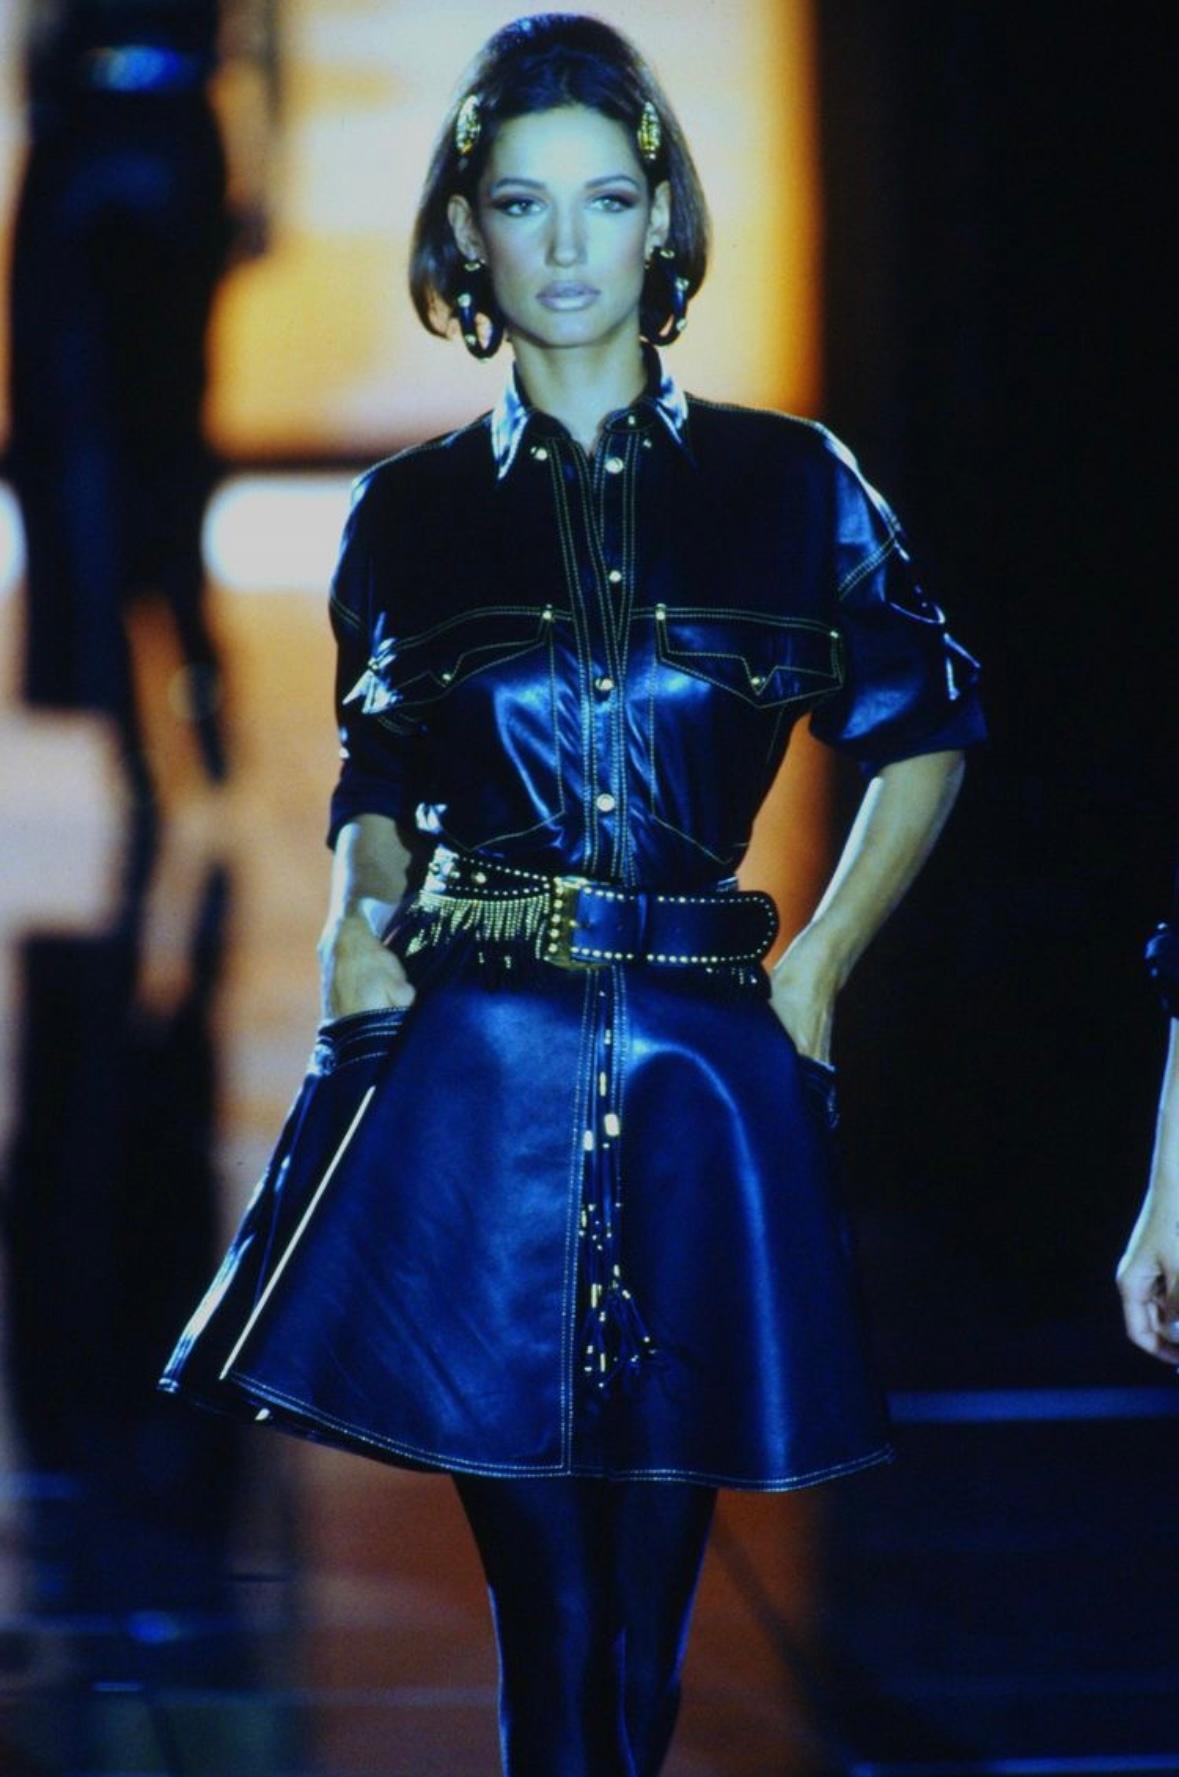 TheRealList presents: a fabulous black leather Gianni Versace belt, designed by Gianni Versace. From the Fall/Winter 1992 ‘Miss S&M’ collection, this wide belt debuted on the season's runway as part of look 39 modeled by Marpessa Hennink. The belt